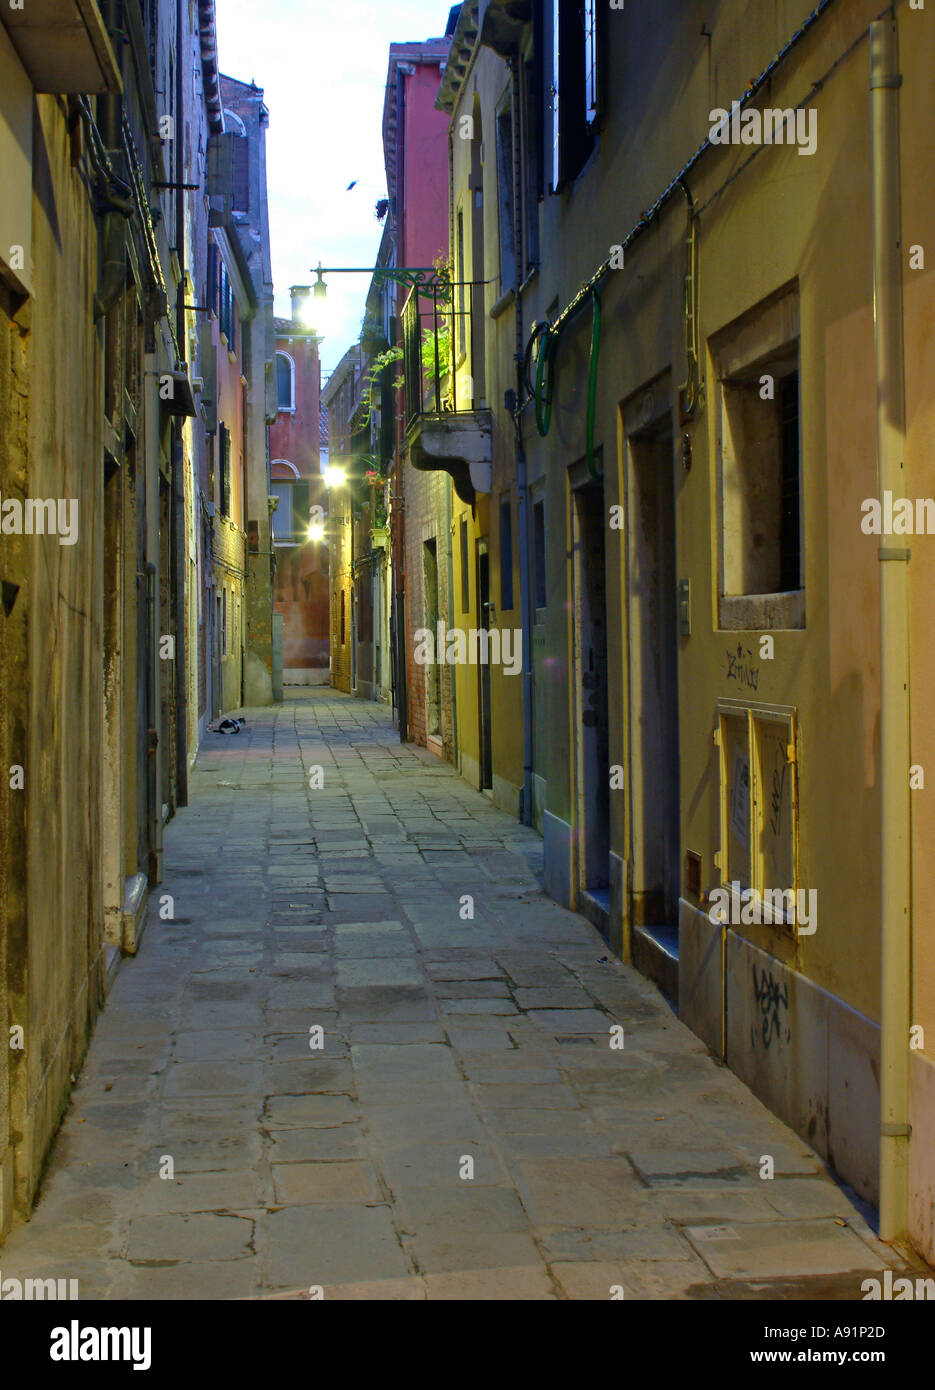 Lonely lane in Venice at night Einsame Gasse in Venedig bei Nacht Stock Photo